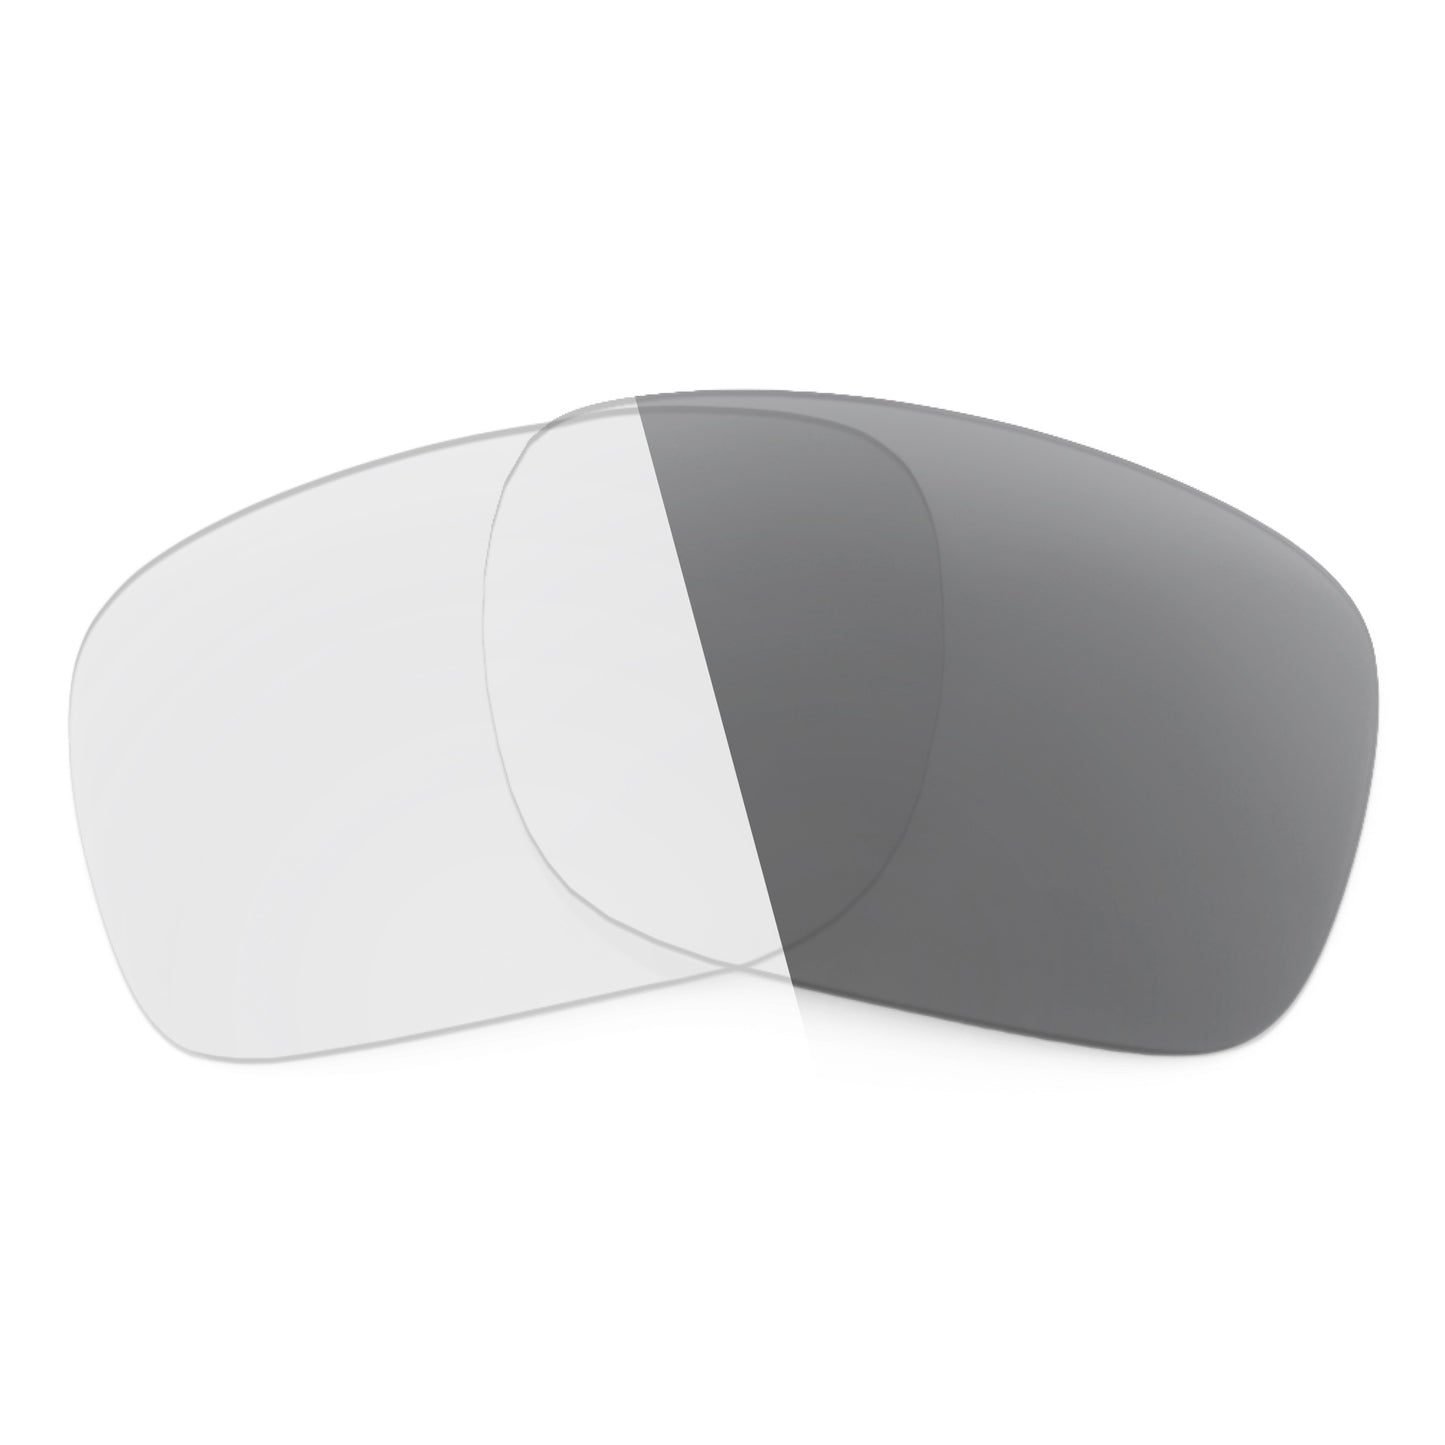 Revant replacement lenses for Ray-Ban RB4226 59mm Non-Polarized Adapt Gray Photochromic